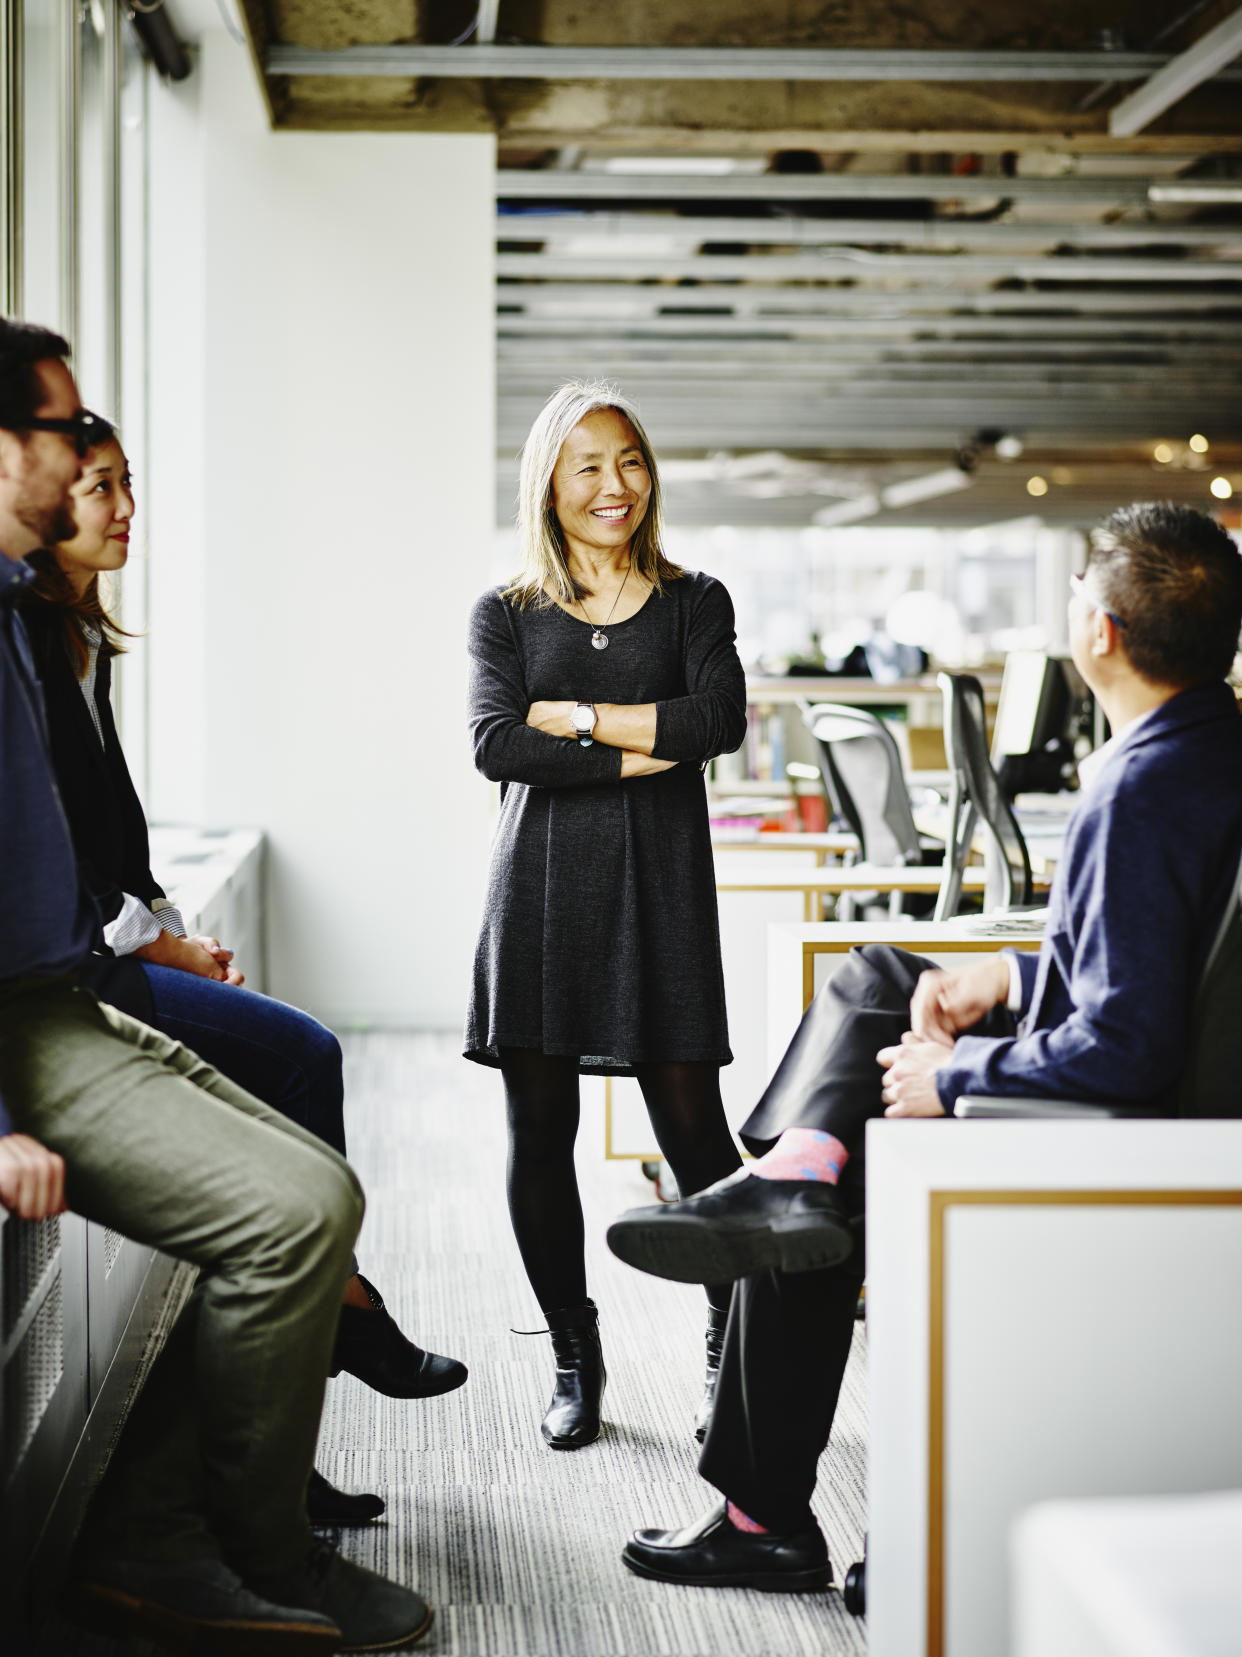 Smiling mature businesswoman leading team meeting in office